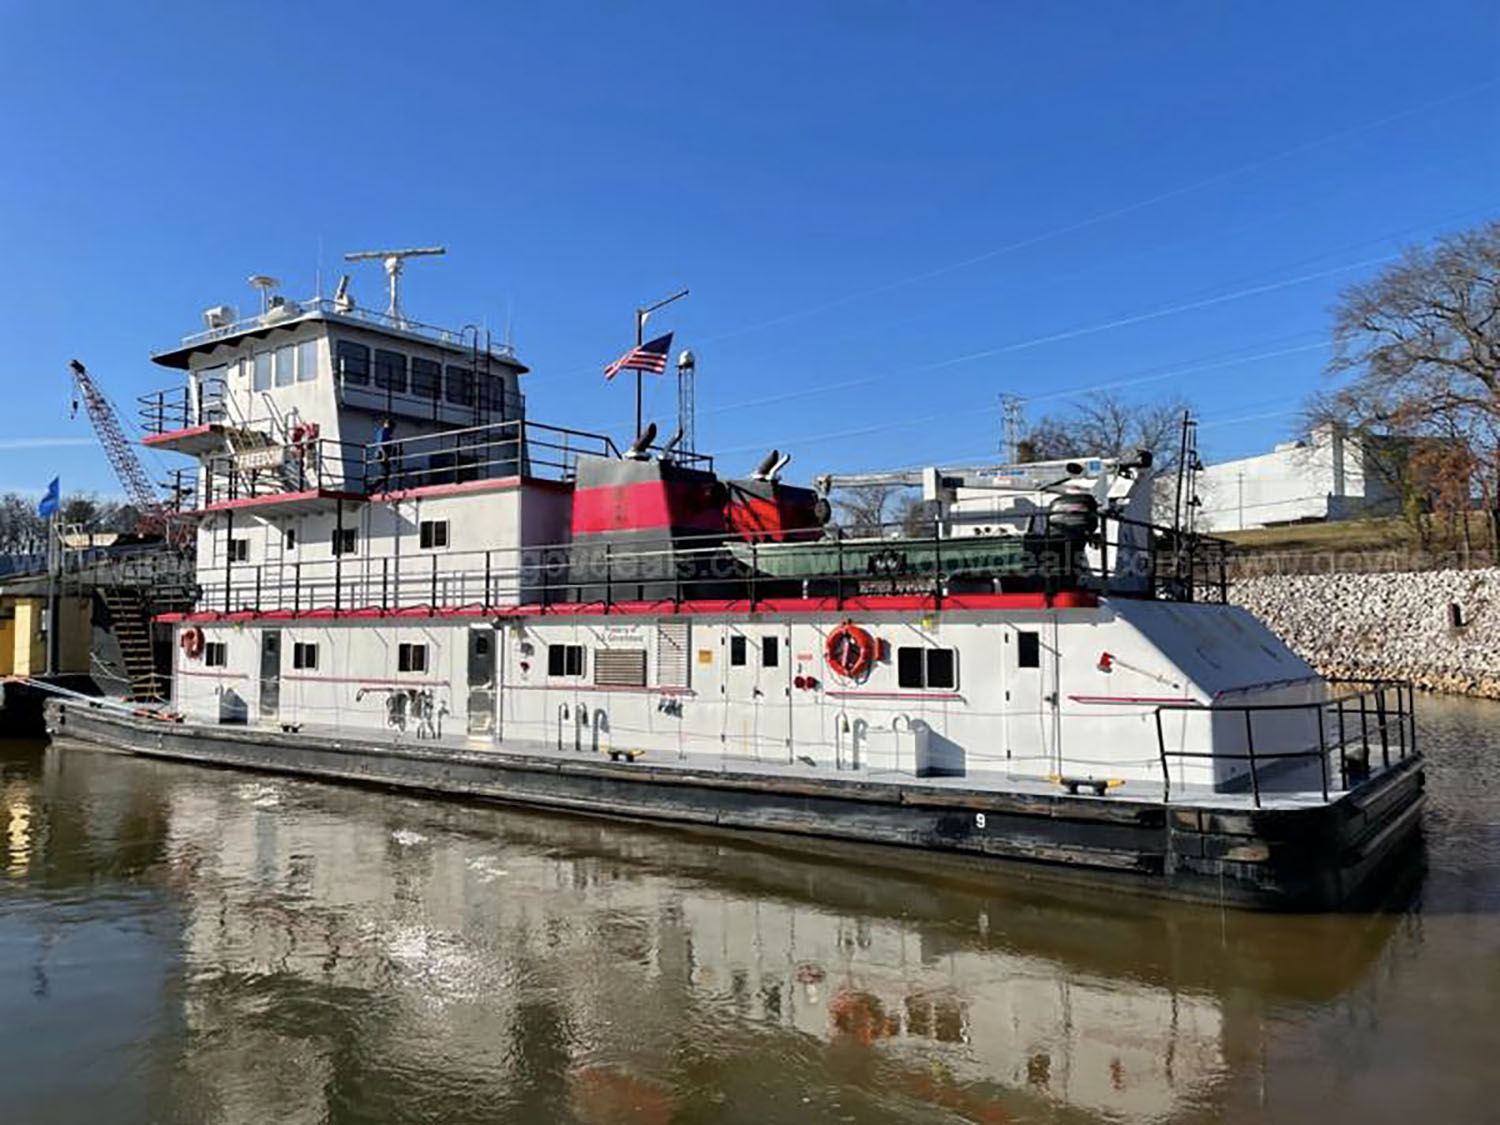 The mv. Freedom, most recently operated by the Tennessee Valley Authority, is for sale in an online auction.